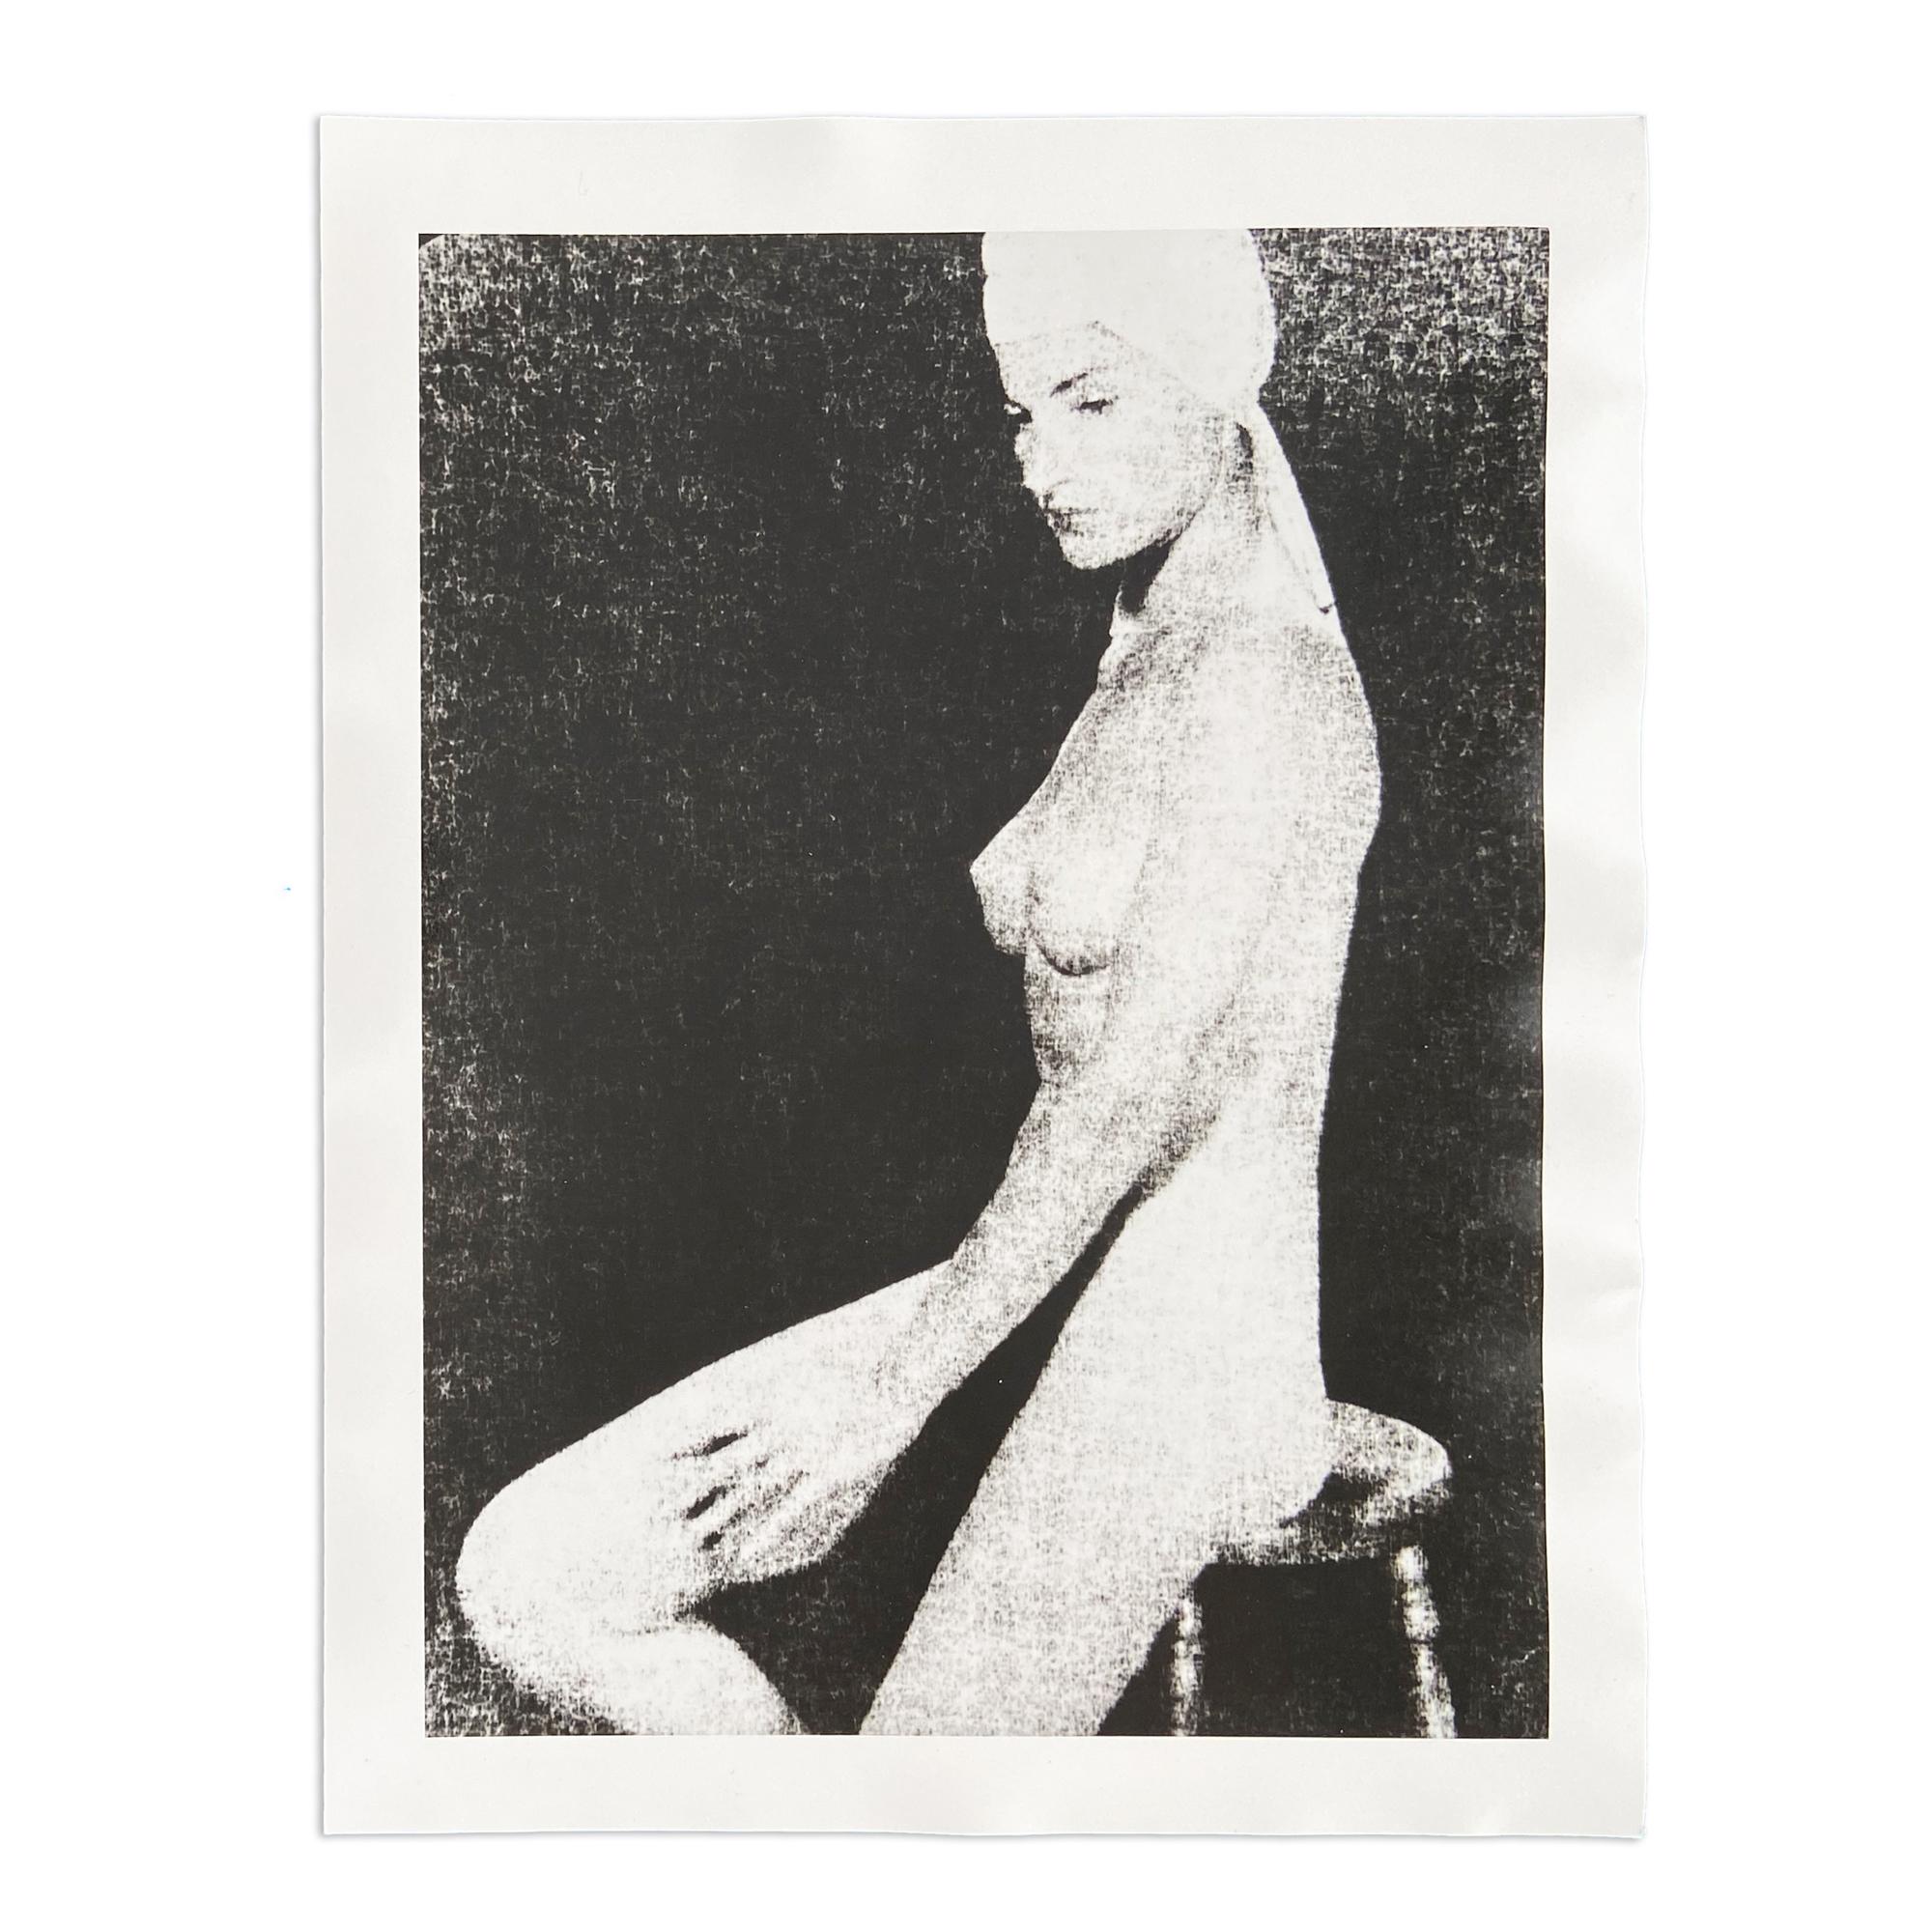 Man Ray (1890-1976)
Juliet, 1945/1991
Medium: Silver Gelatin Print (posthumous print)
Dimensions: 30.5 x 24 cm
Stamped: "Copie d'une épreuve originale - ADAGP Man Ray Trust"
Condition: Very good

This photograph by Man Ray was taken in 1945 and